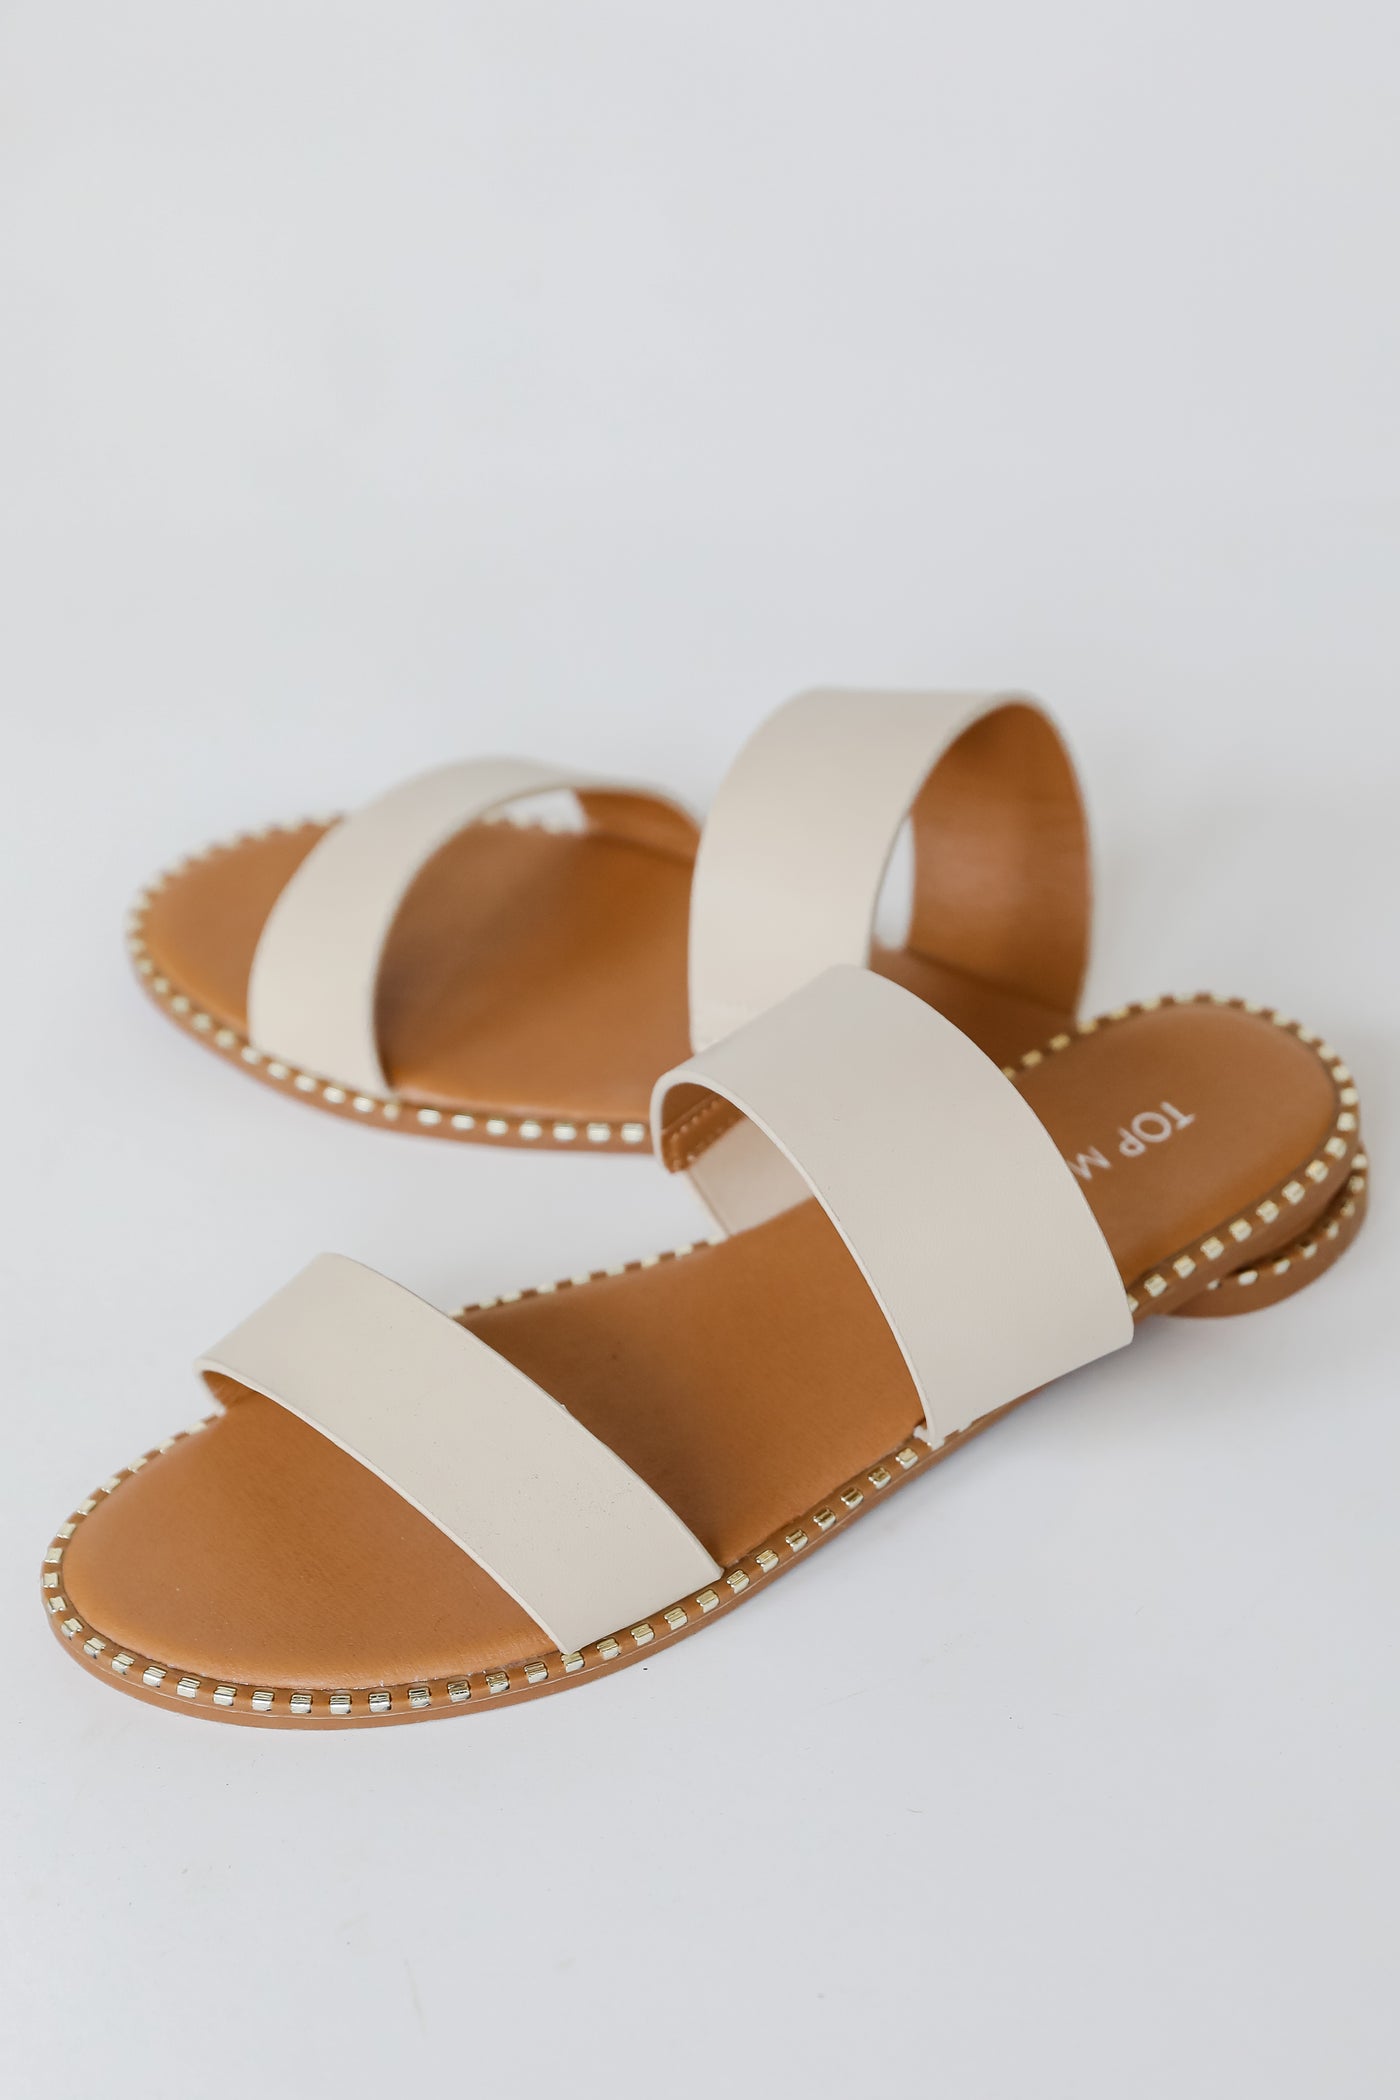 Double Strap Sandals in ivory close up